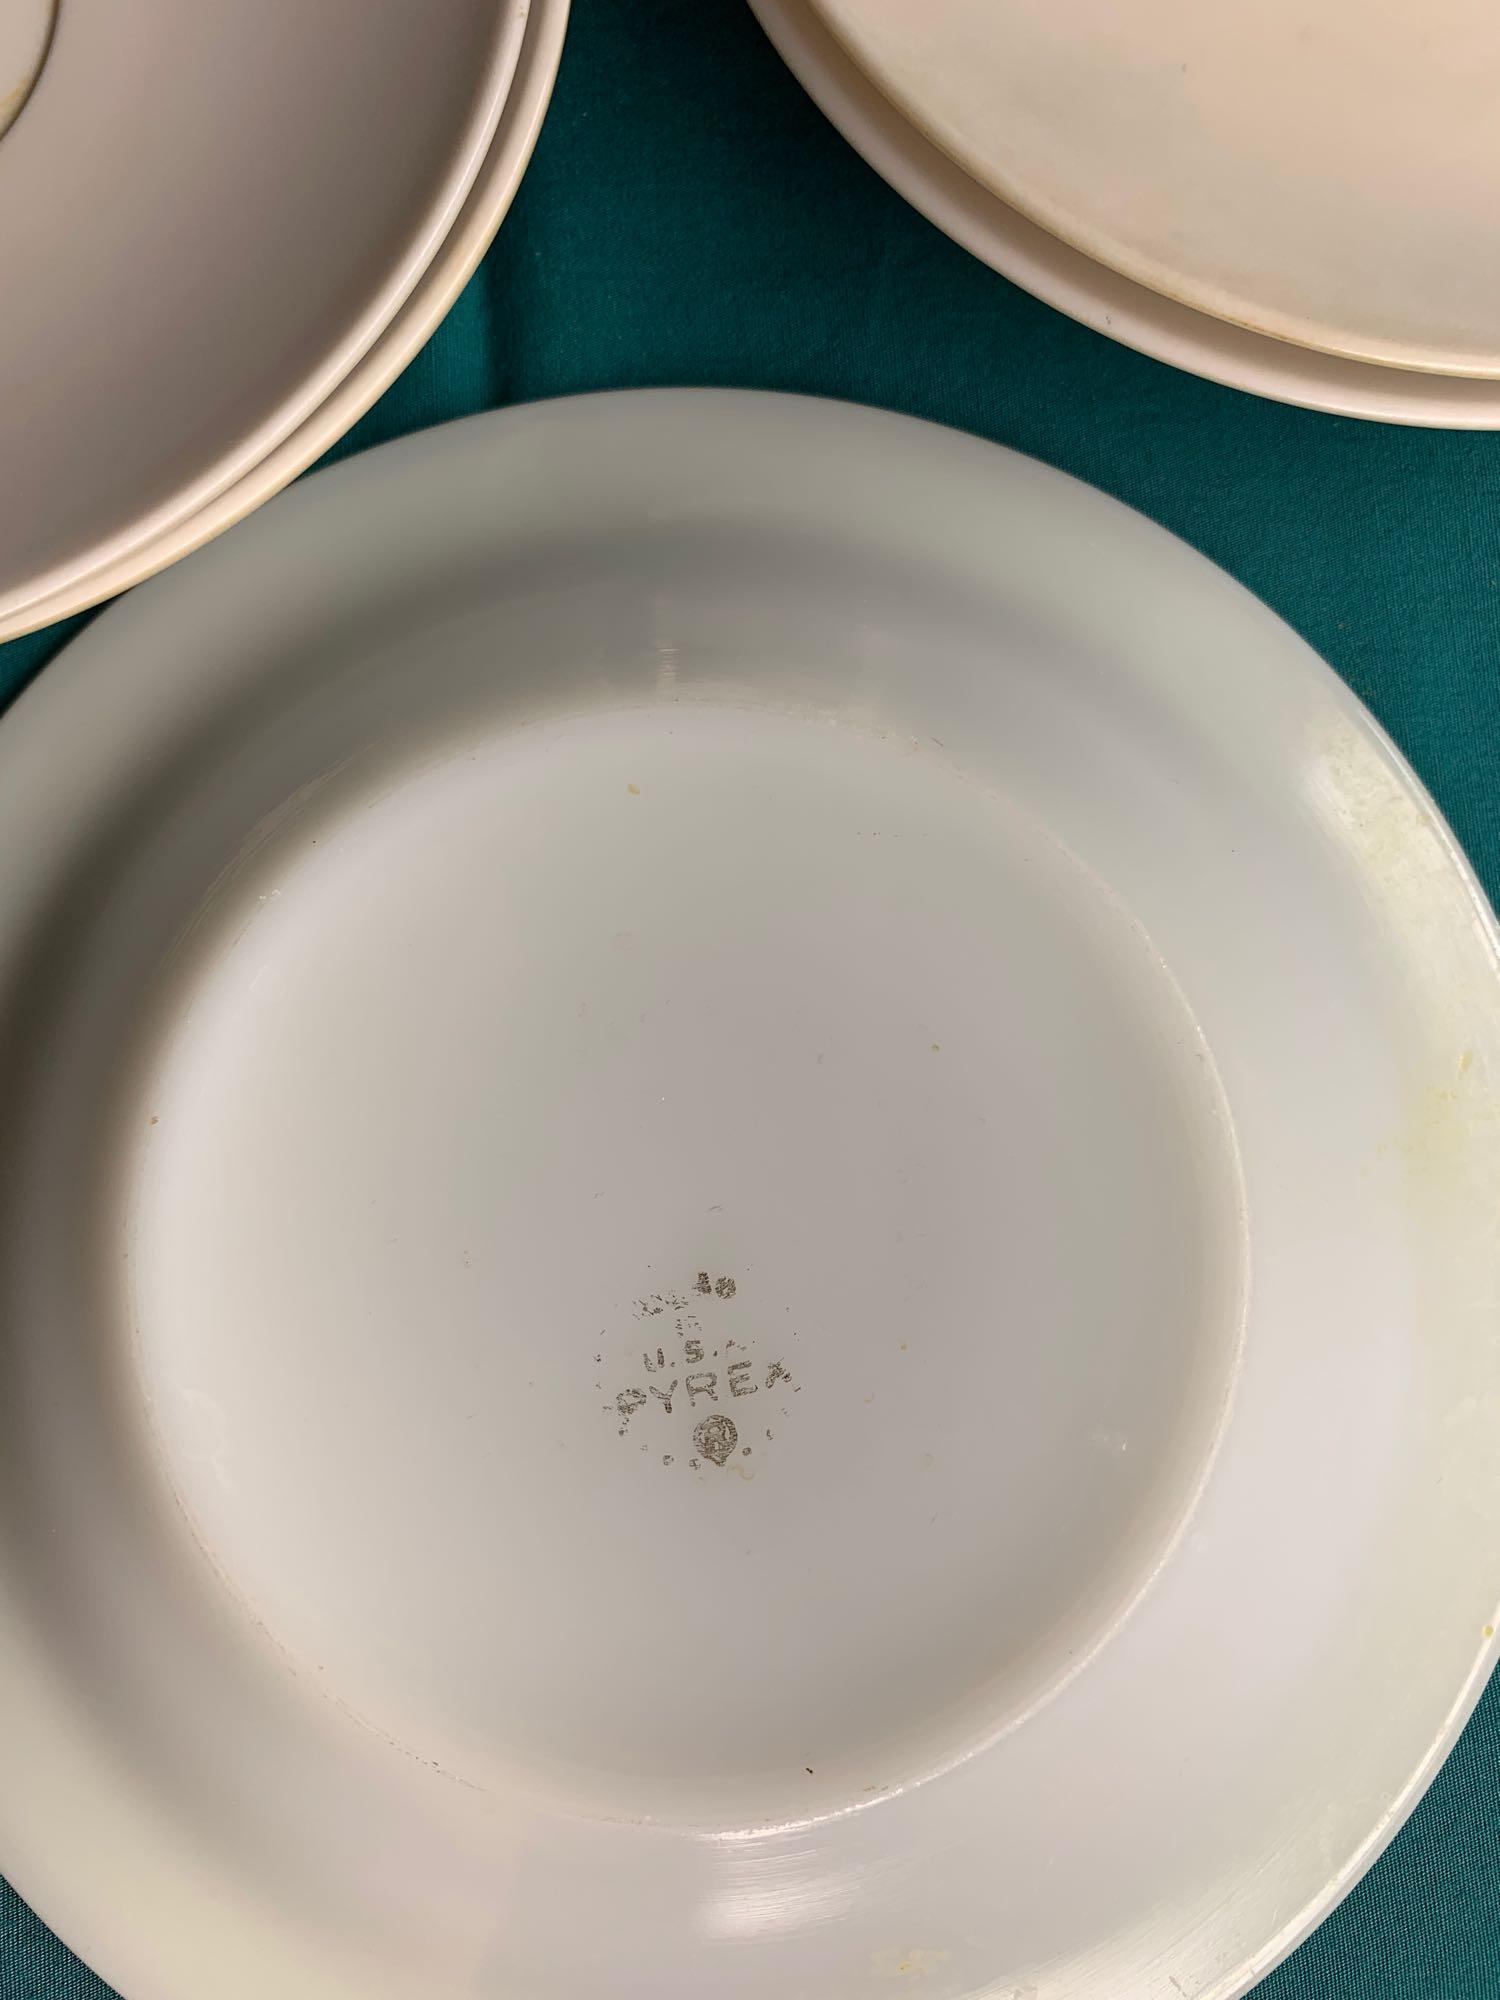 Sun_Valley MelMac Dishes, Prolon Dinnerware, & Pyrex Dishes